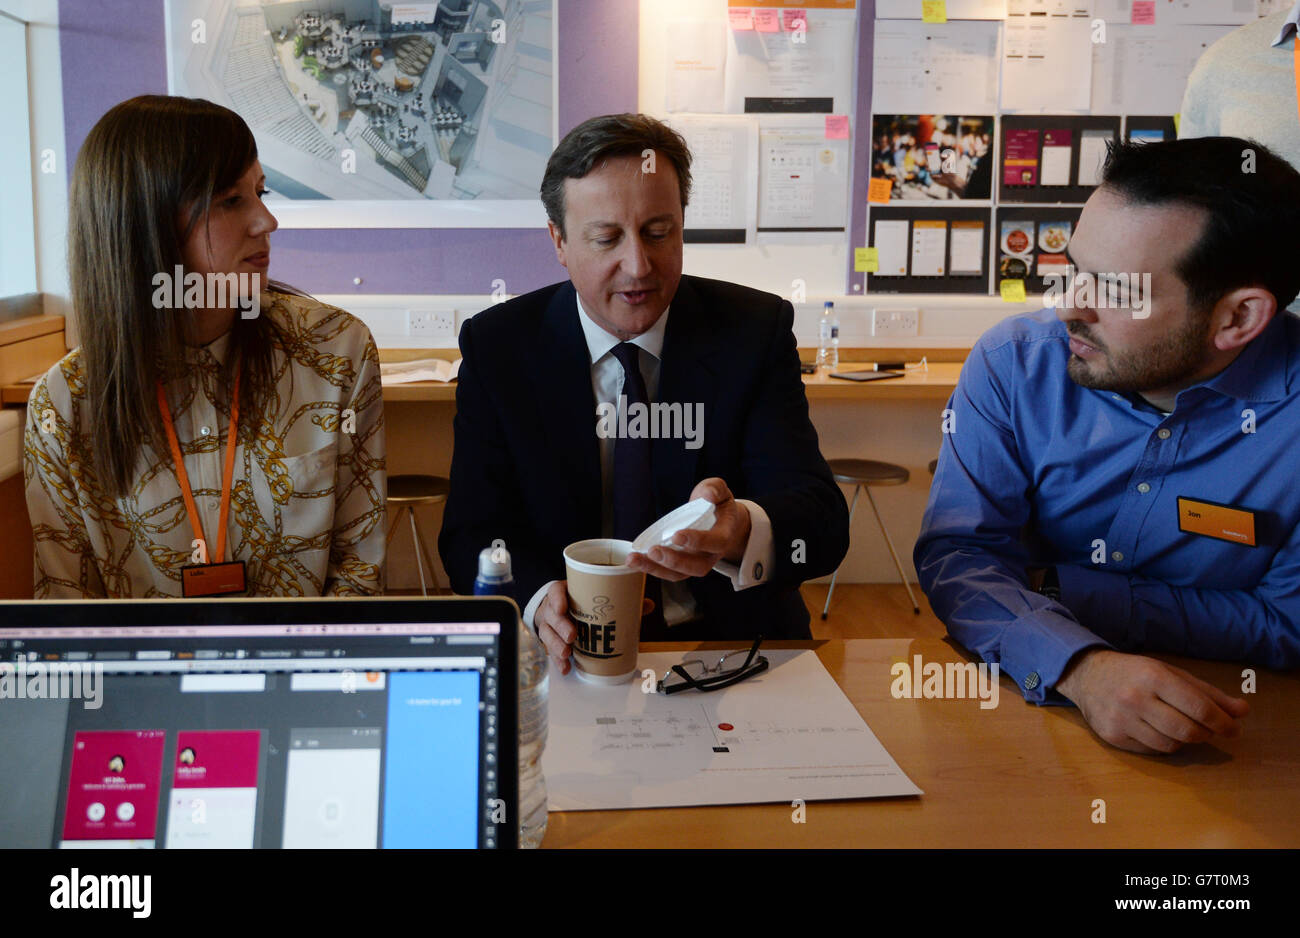 Conservative party leader David Cameron (centre) meets digital staff at the Sainsbury's head office in Holborn London, where he saw how they design their interactive website. Stock Photo